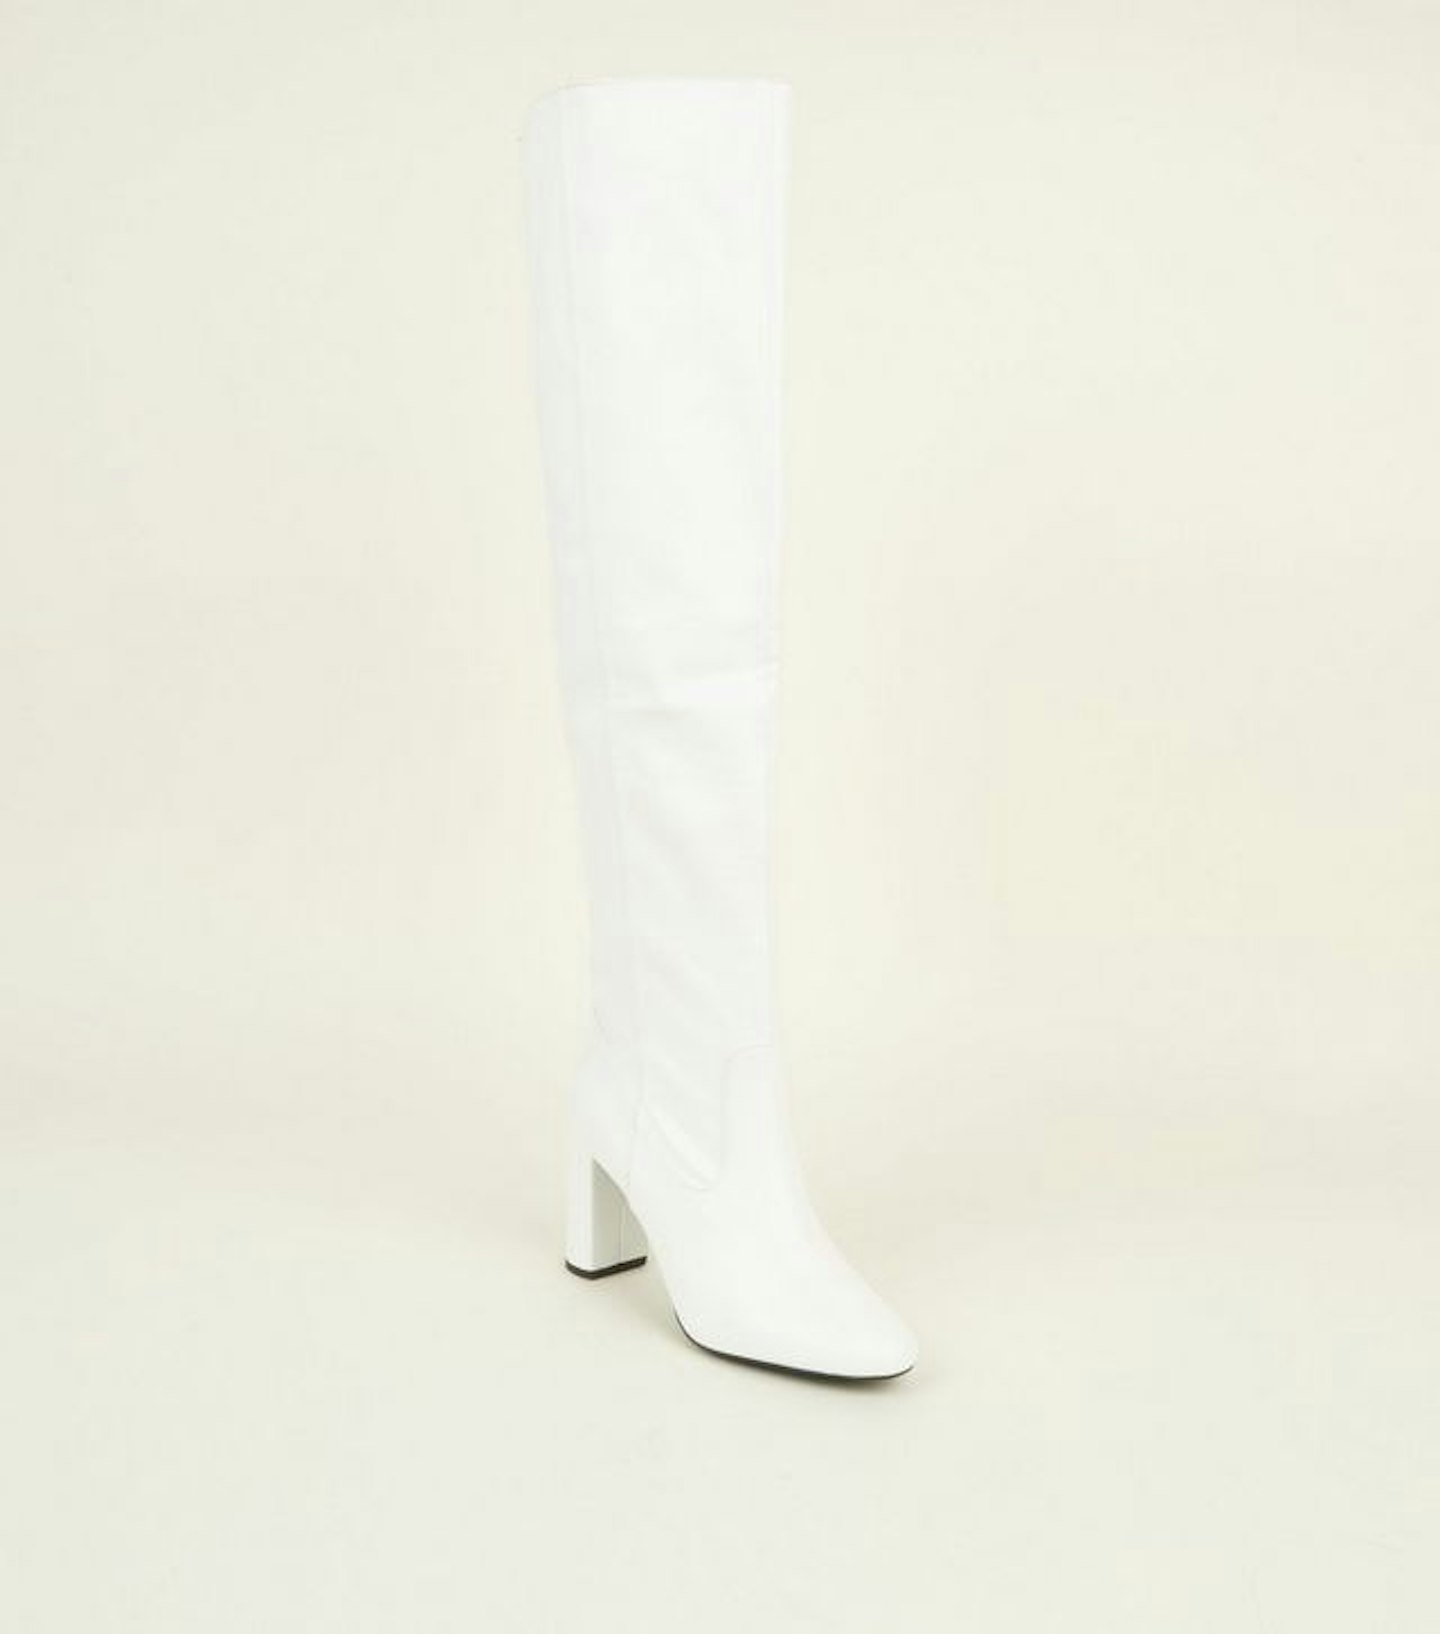 New Look, White Slouch Heeled Boots, £39.99